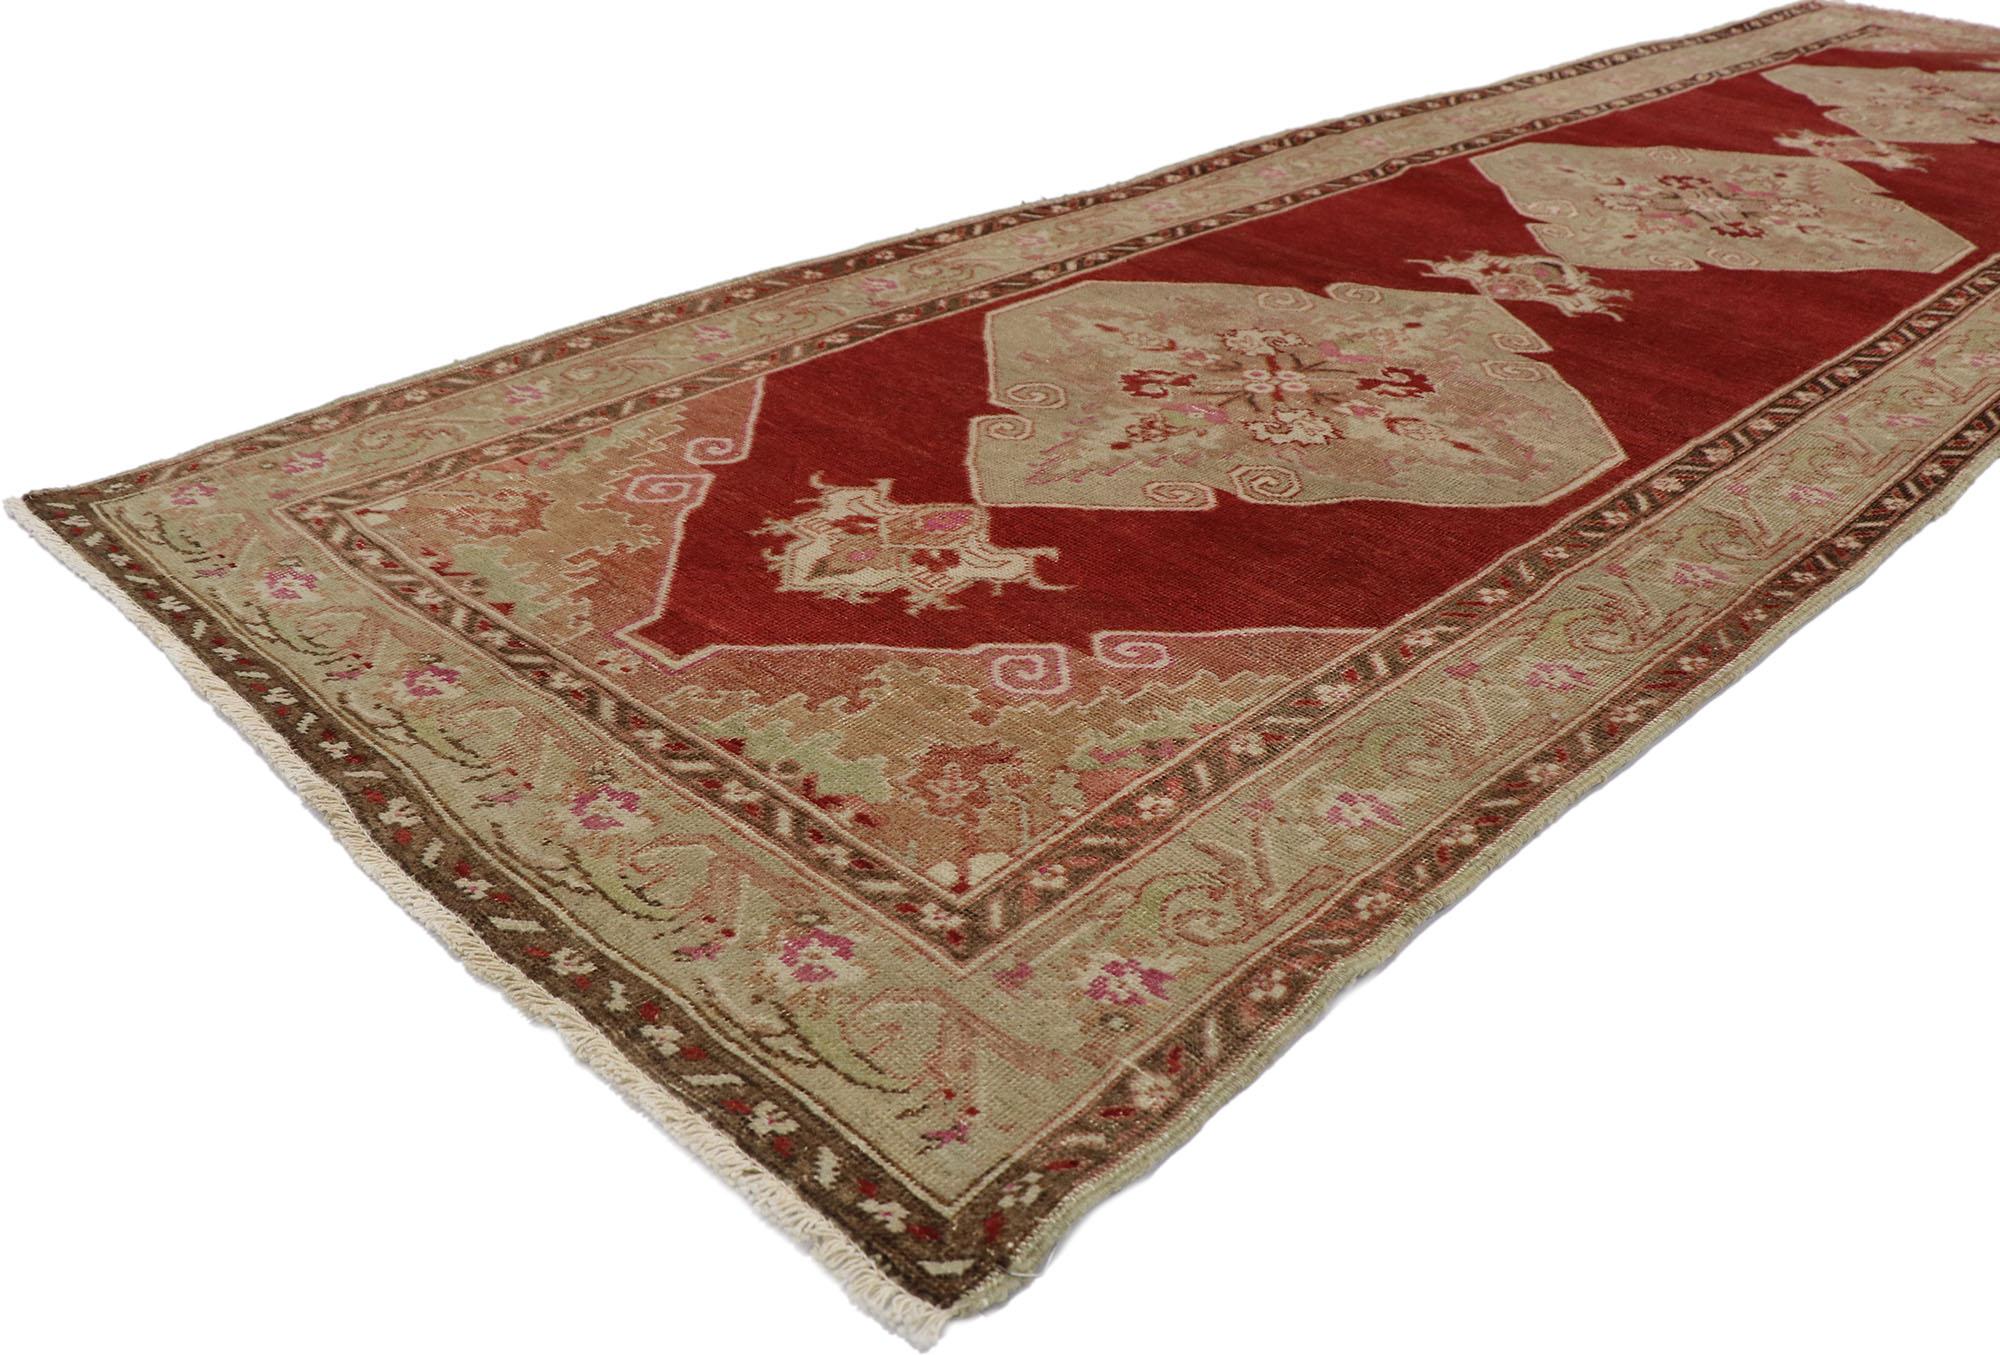 53614 Vintage Turkish Oushak runner with English Tudor Style 03'04 x 10'10. With its striking appeal and effortless beauty, this hand-knotted wool vintage Turkish Oushak runner appears like a sumptuous Italian velvet, recalling the rich and